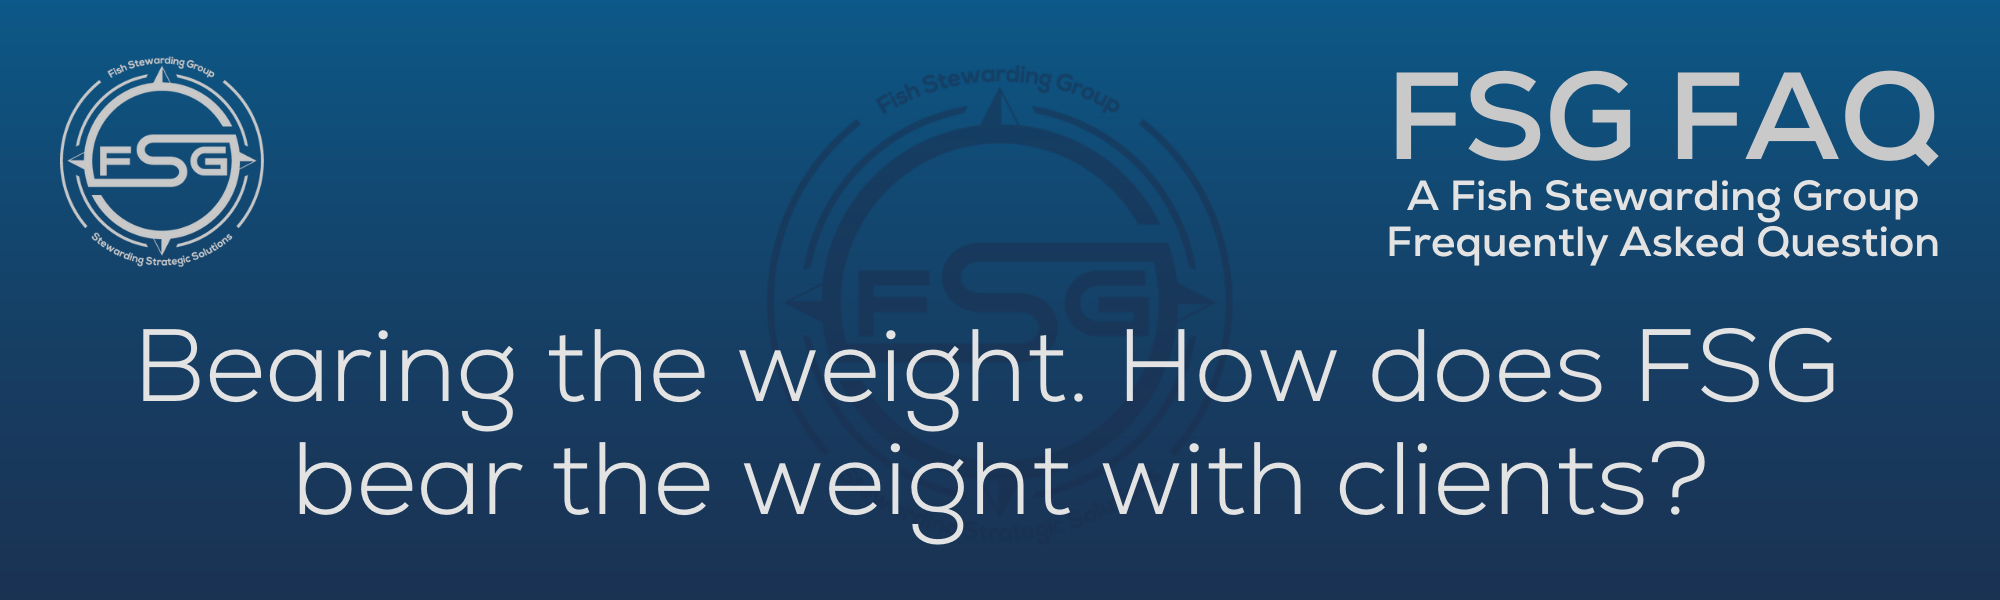 A rectangular and long thing Footer FAQ Image on the bottom of the Bearing the weight? Page on the website. The background is a blue gradient color that goes from a dark blue on the bottom to a lighter blue on top. The text in lower center of the image in a light gray text that reads: Bearing the weight? The text in gray in the upper right corner reads: FSG FAQ. Right beneath that is more gray text in a smaller font that reads: A Fish Stewarding Group Frequently Asked Question. On the upper left side is the FSG Logo in gray. The logo has the letters FSG in the middle with a circle with four pointed arrows facing north, south, east and west with the S connected to that circle. Four rounded lines make the next circle of the circle and the last layer is a thin circle with the text on the Bottom that reads Stewarding Strategist Solutions and on top, the text reads Fish Stewarding Group. And Lastly in the center background of the image is a watermarked FSG logo, faded in blue, in the background.